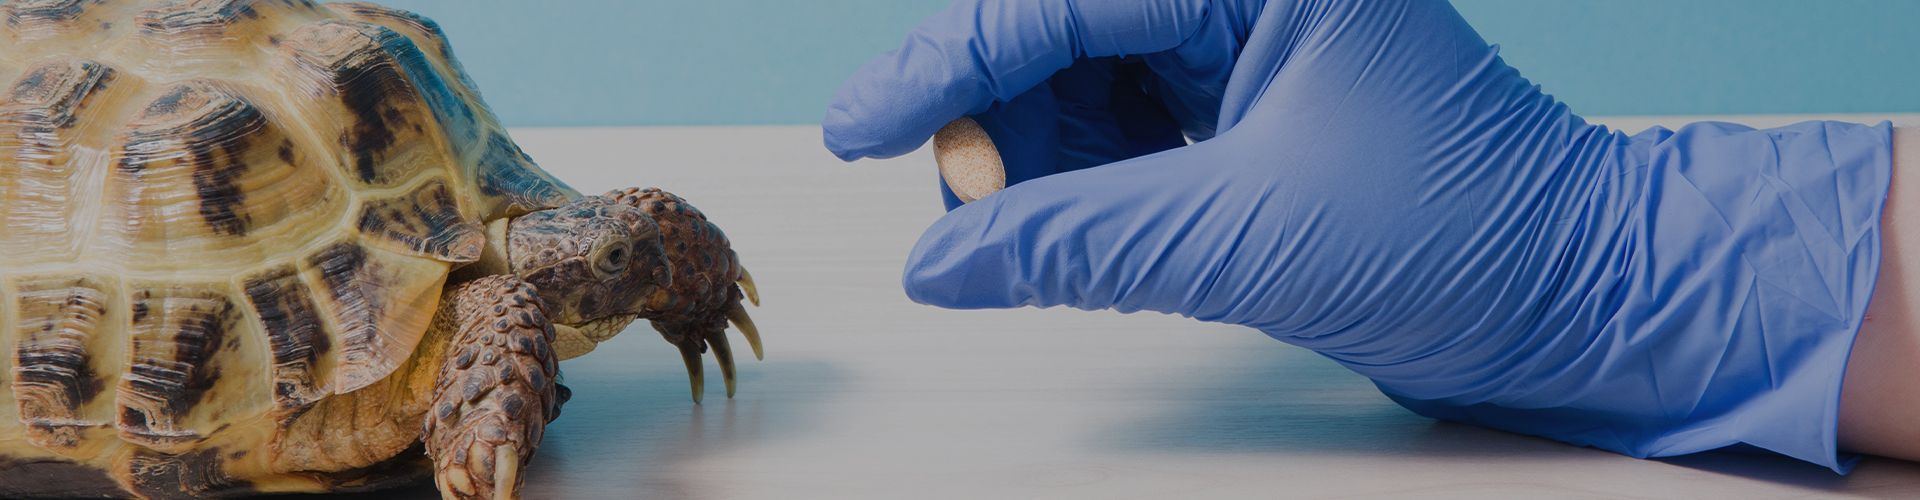 Veterinarian hand with glove gives pill treatment to a turtle in a blue surface